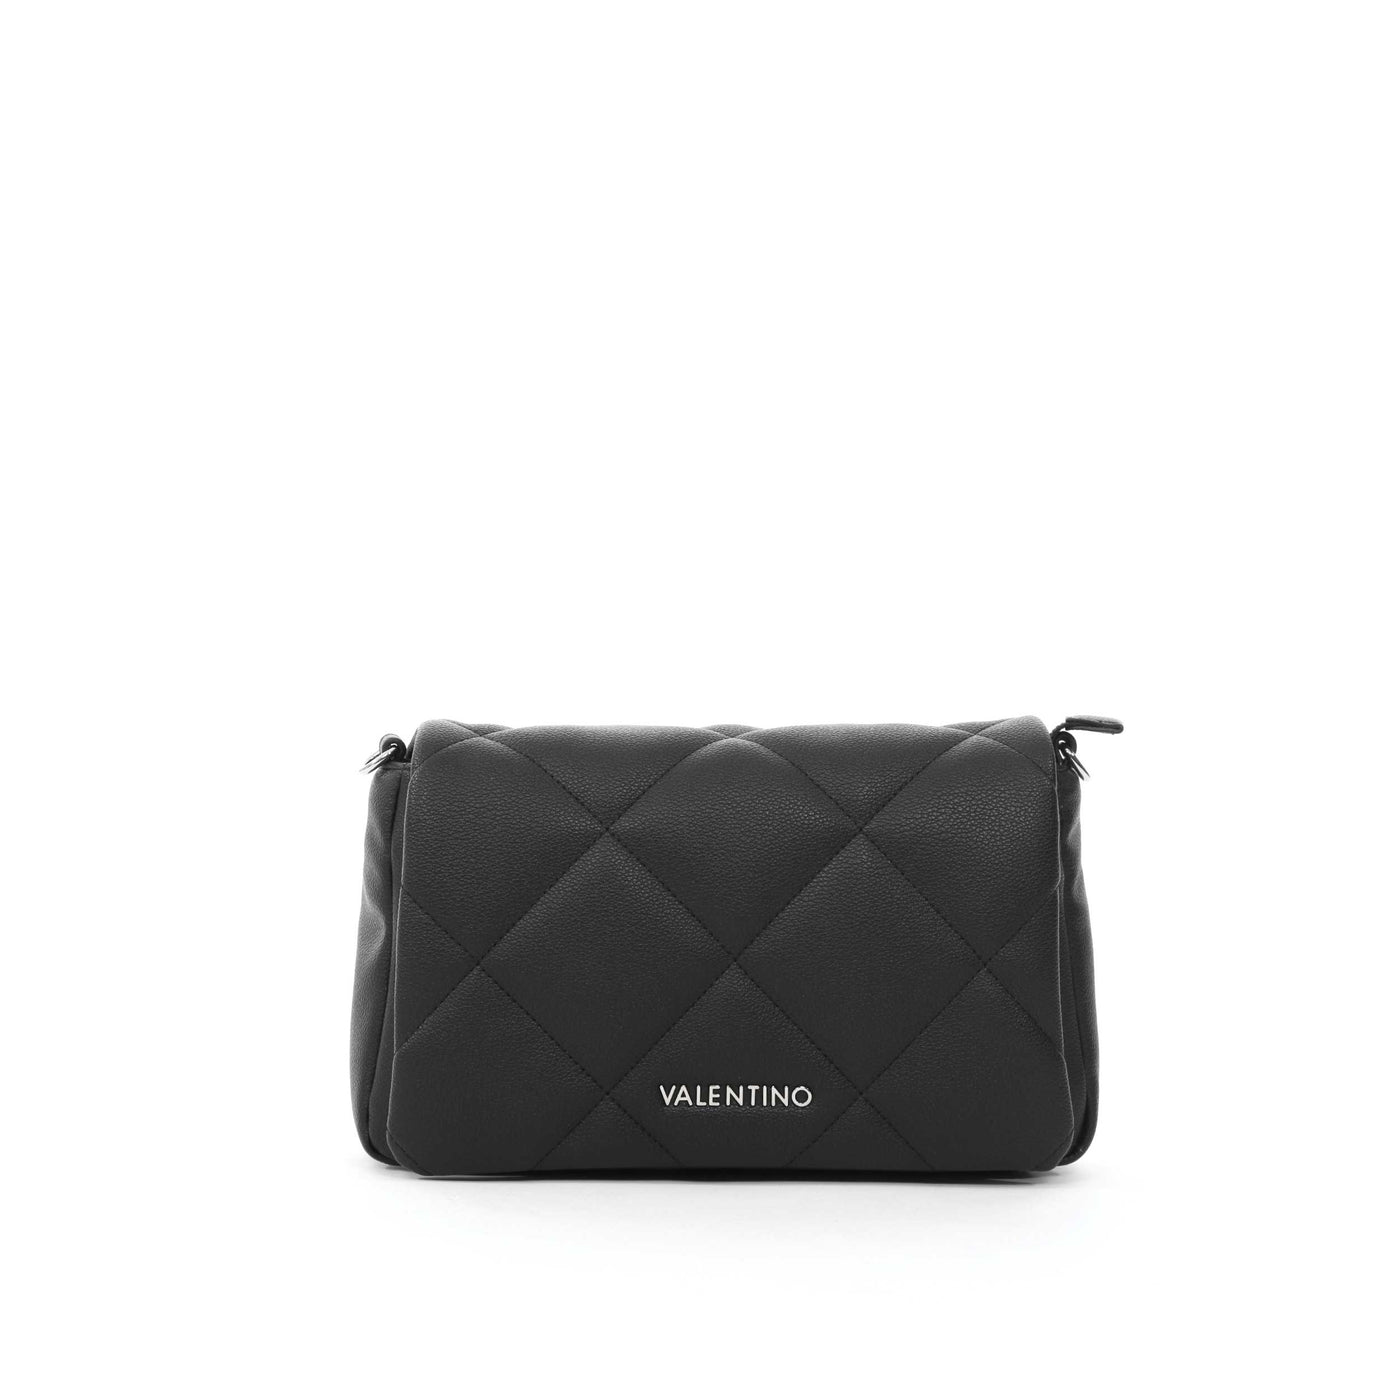 Valentino Bags Cold RE Ladies Shoulder Flap Bag in Black Front